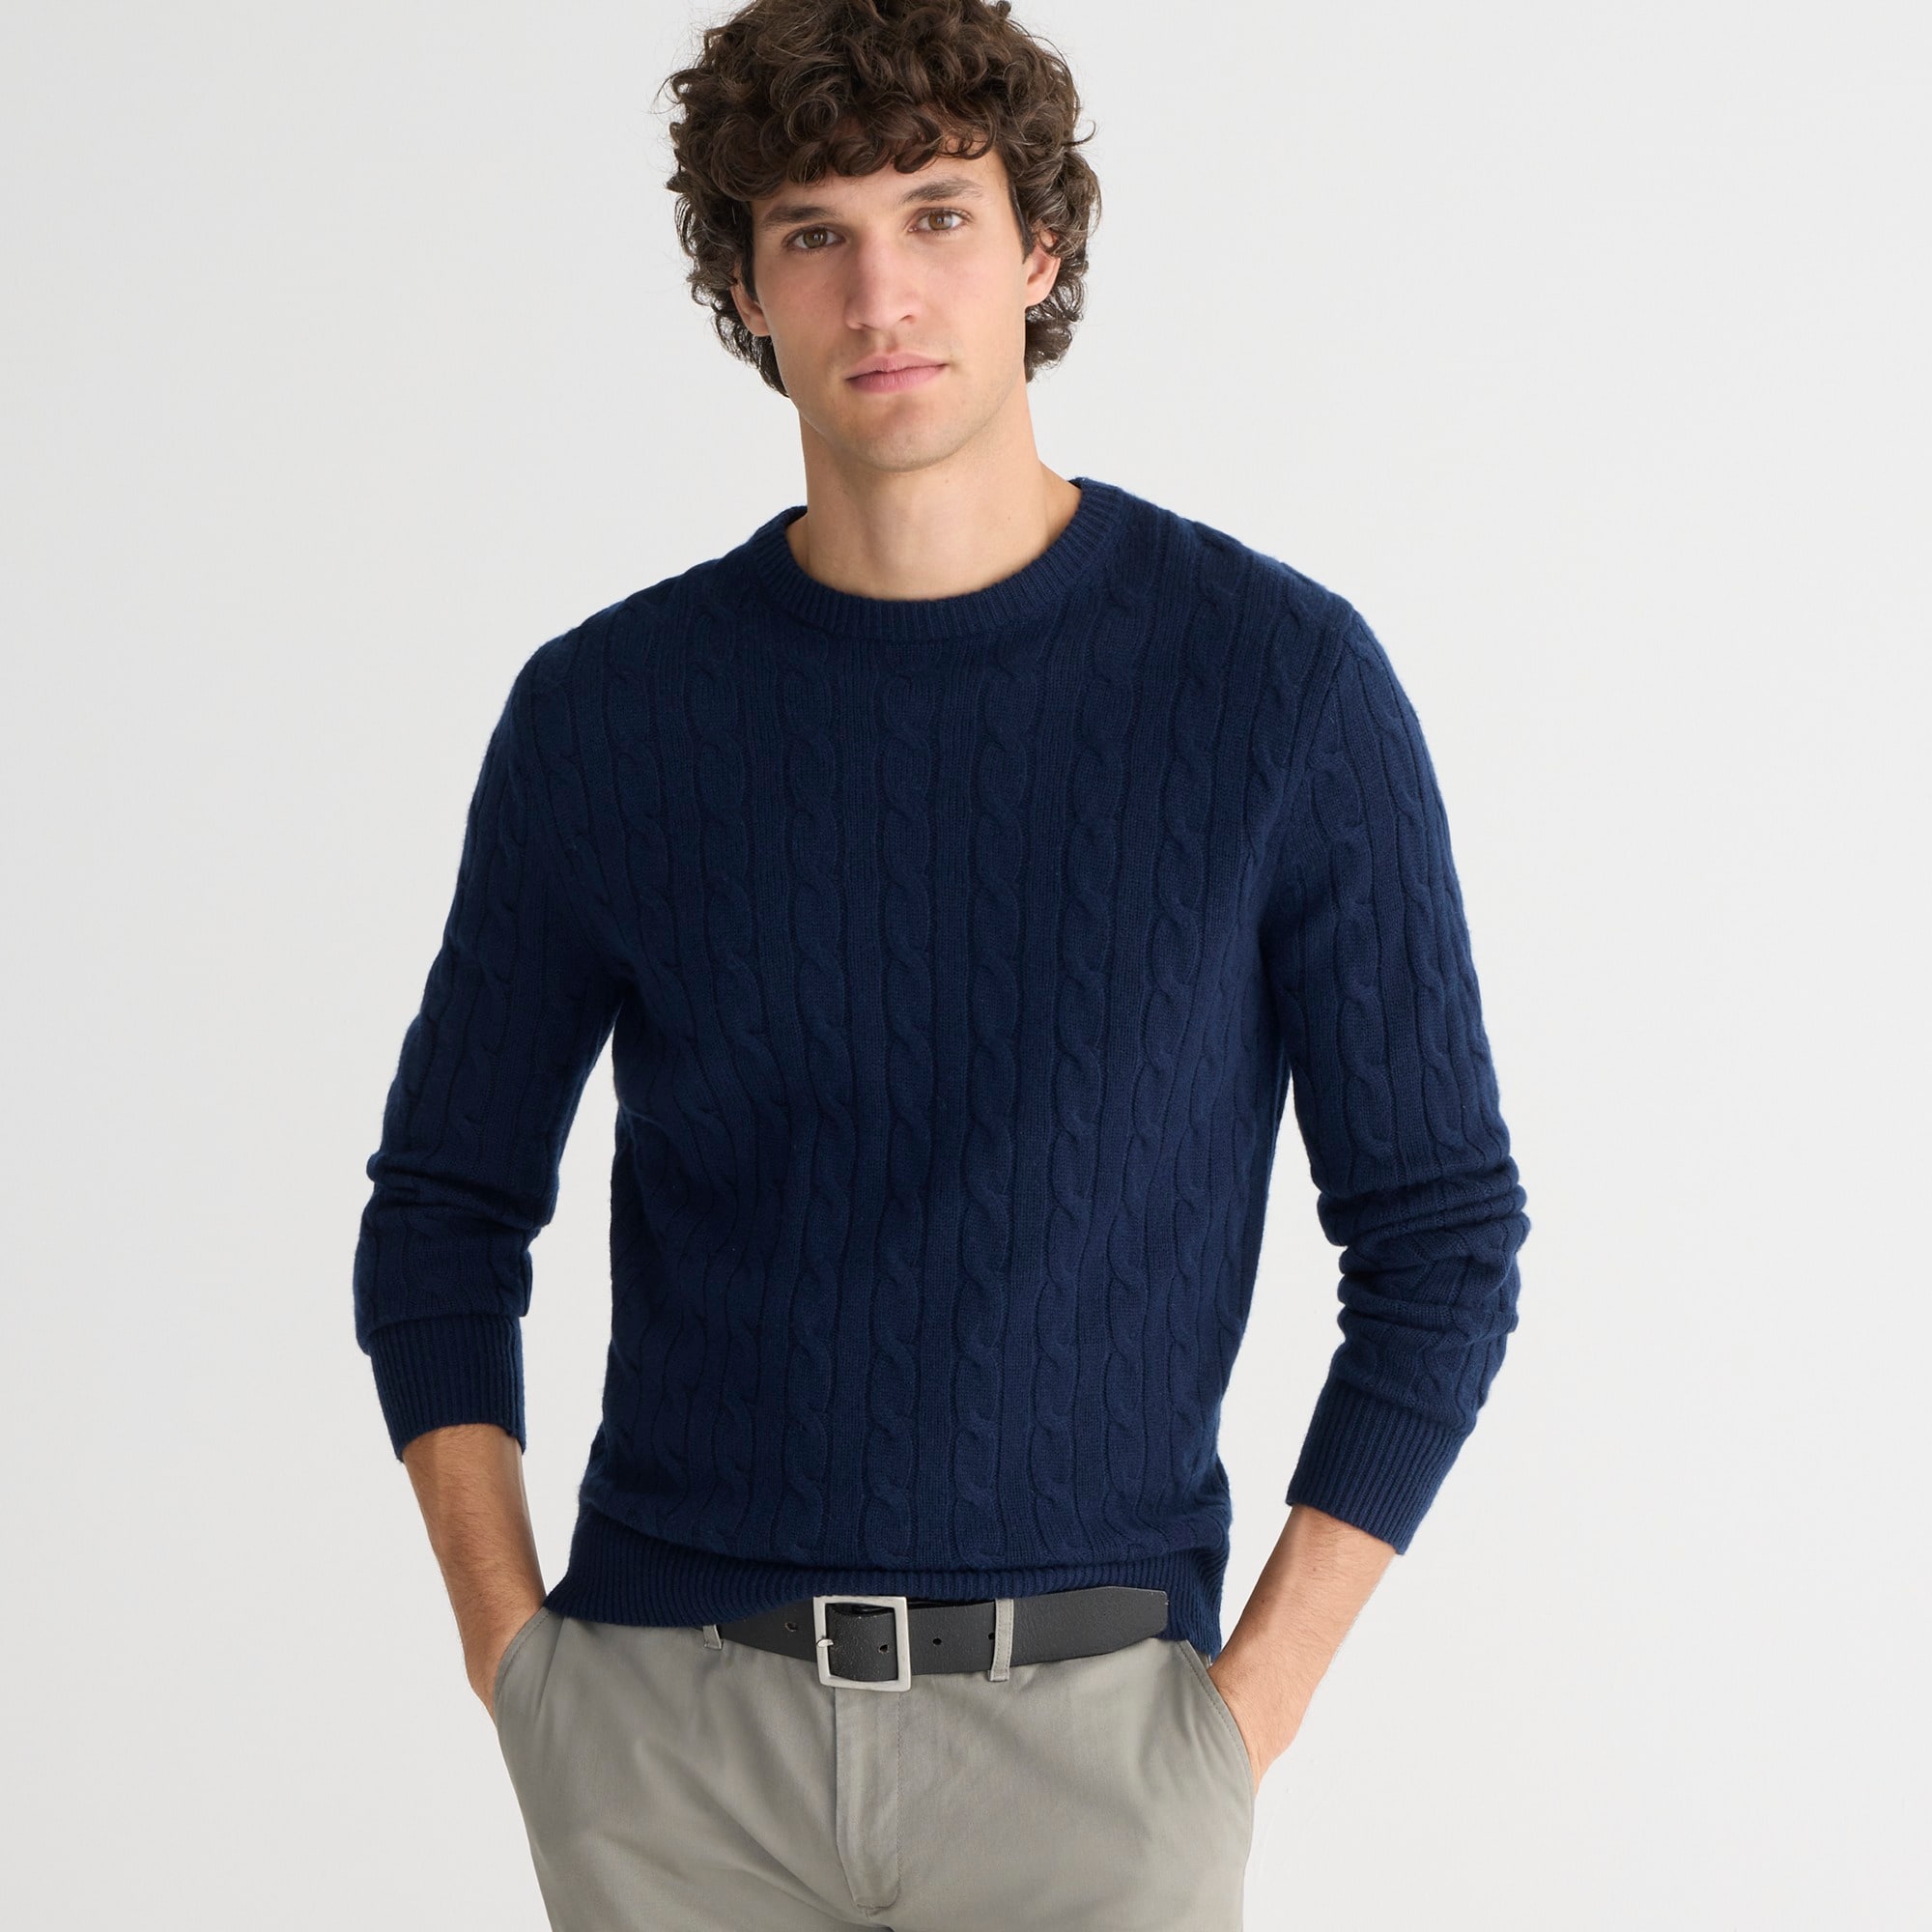 Jcrew Cashmere cable-knit sweater